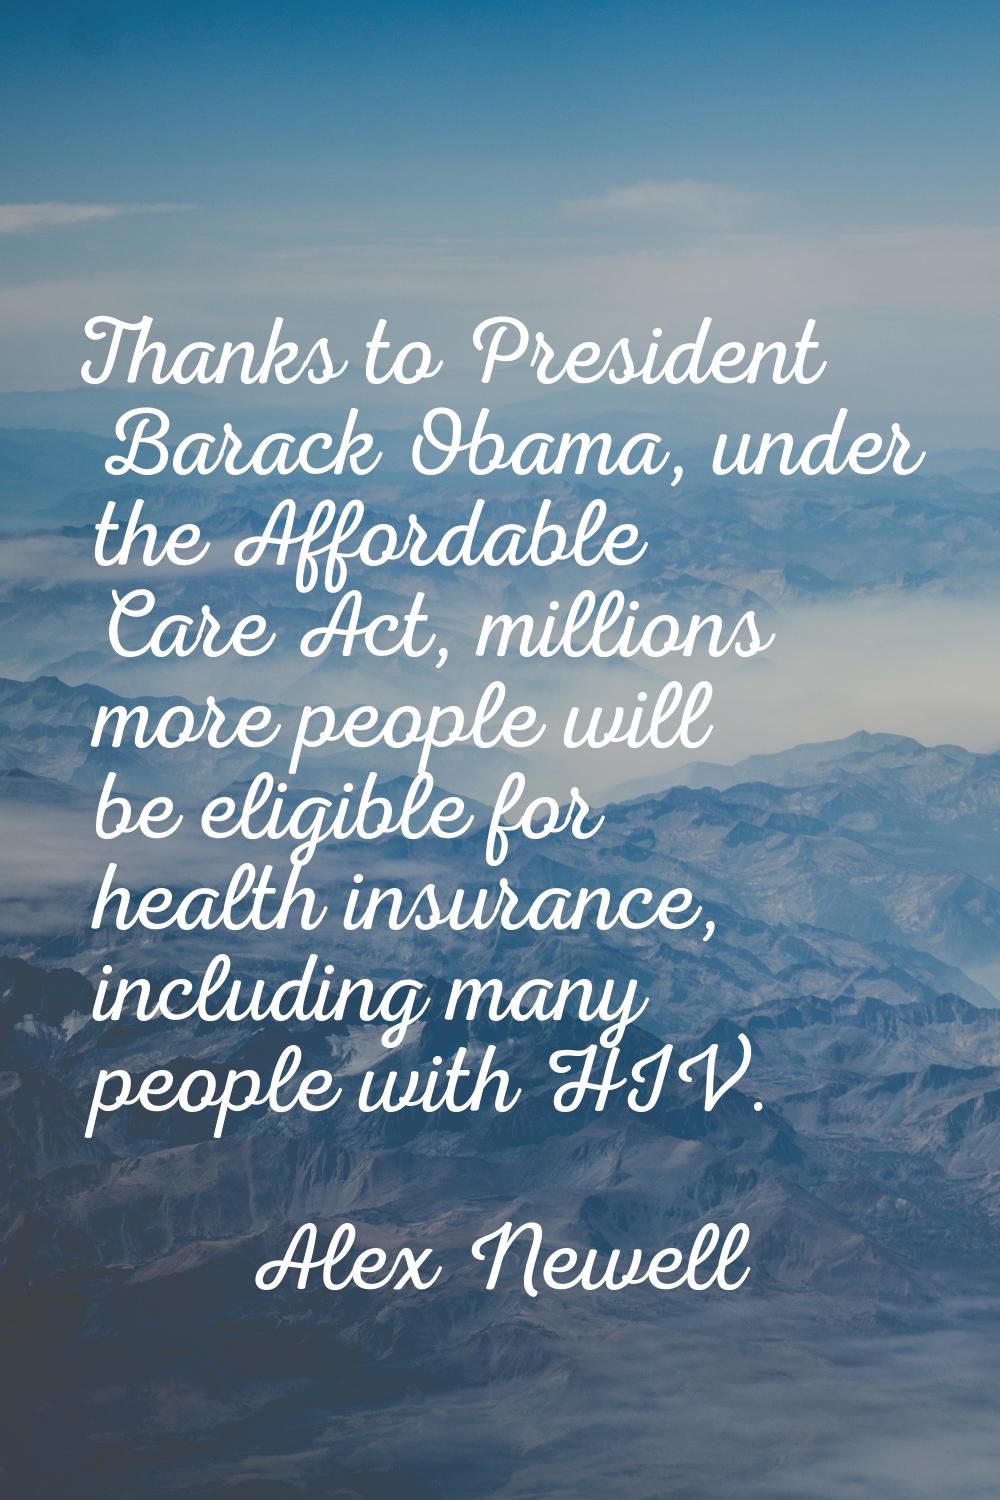 Thanks to President Barack Obama, under the Affordable Care Act, millions more people will be eligi